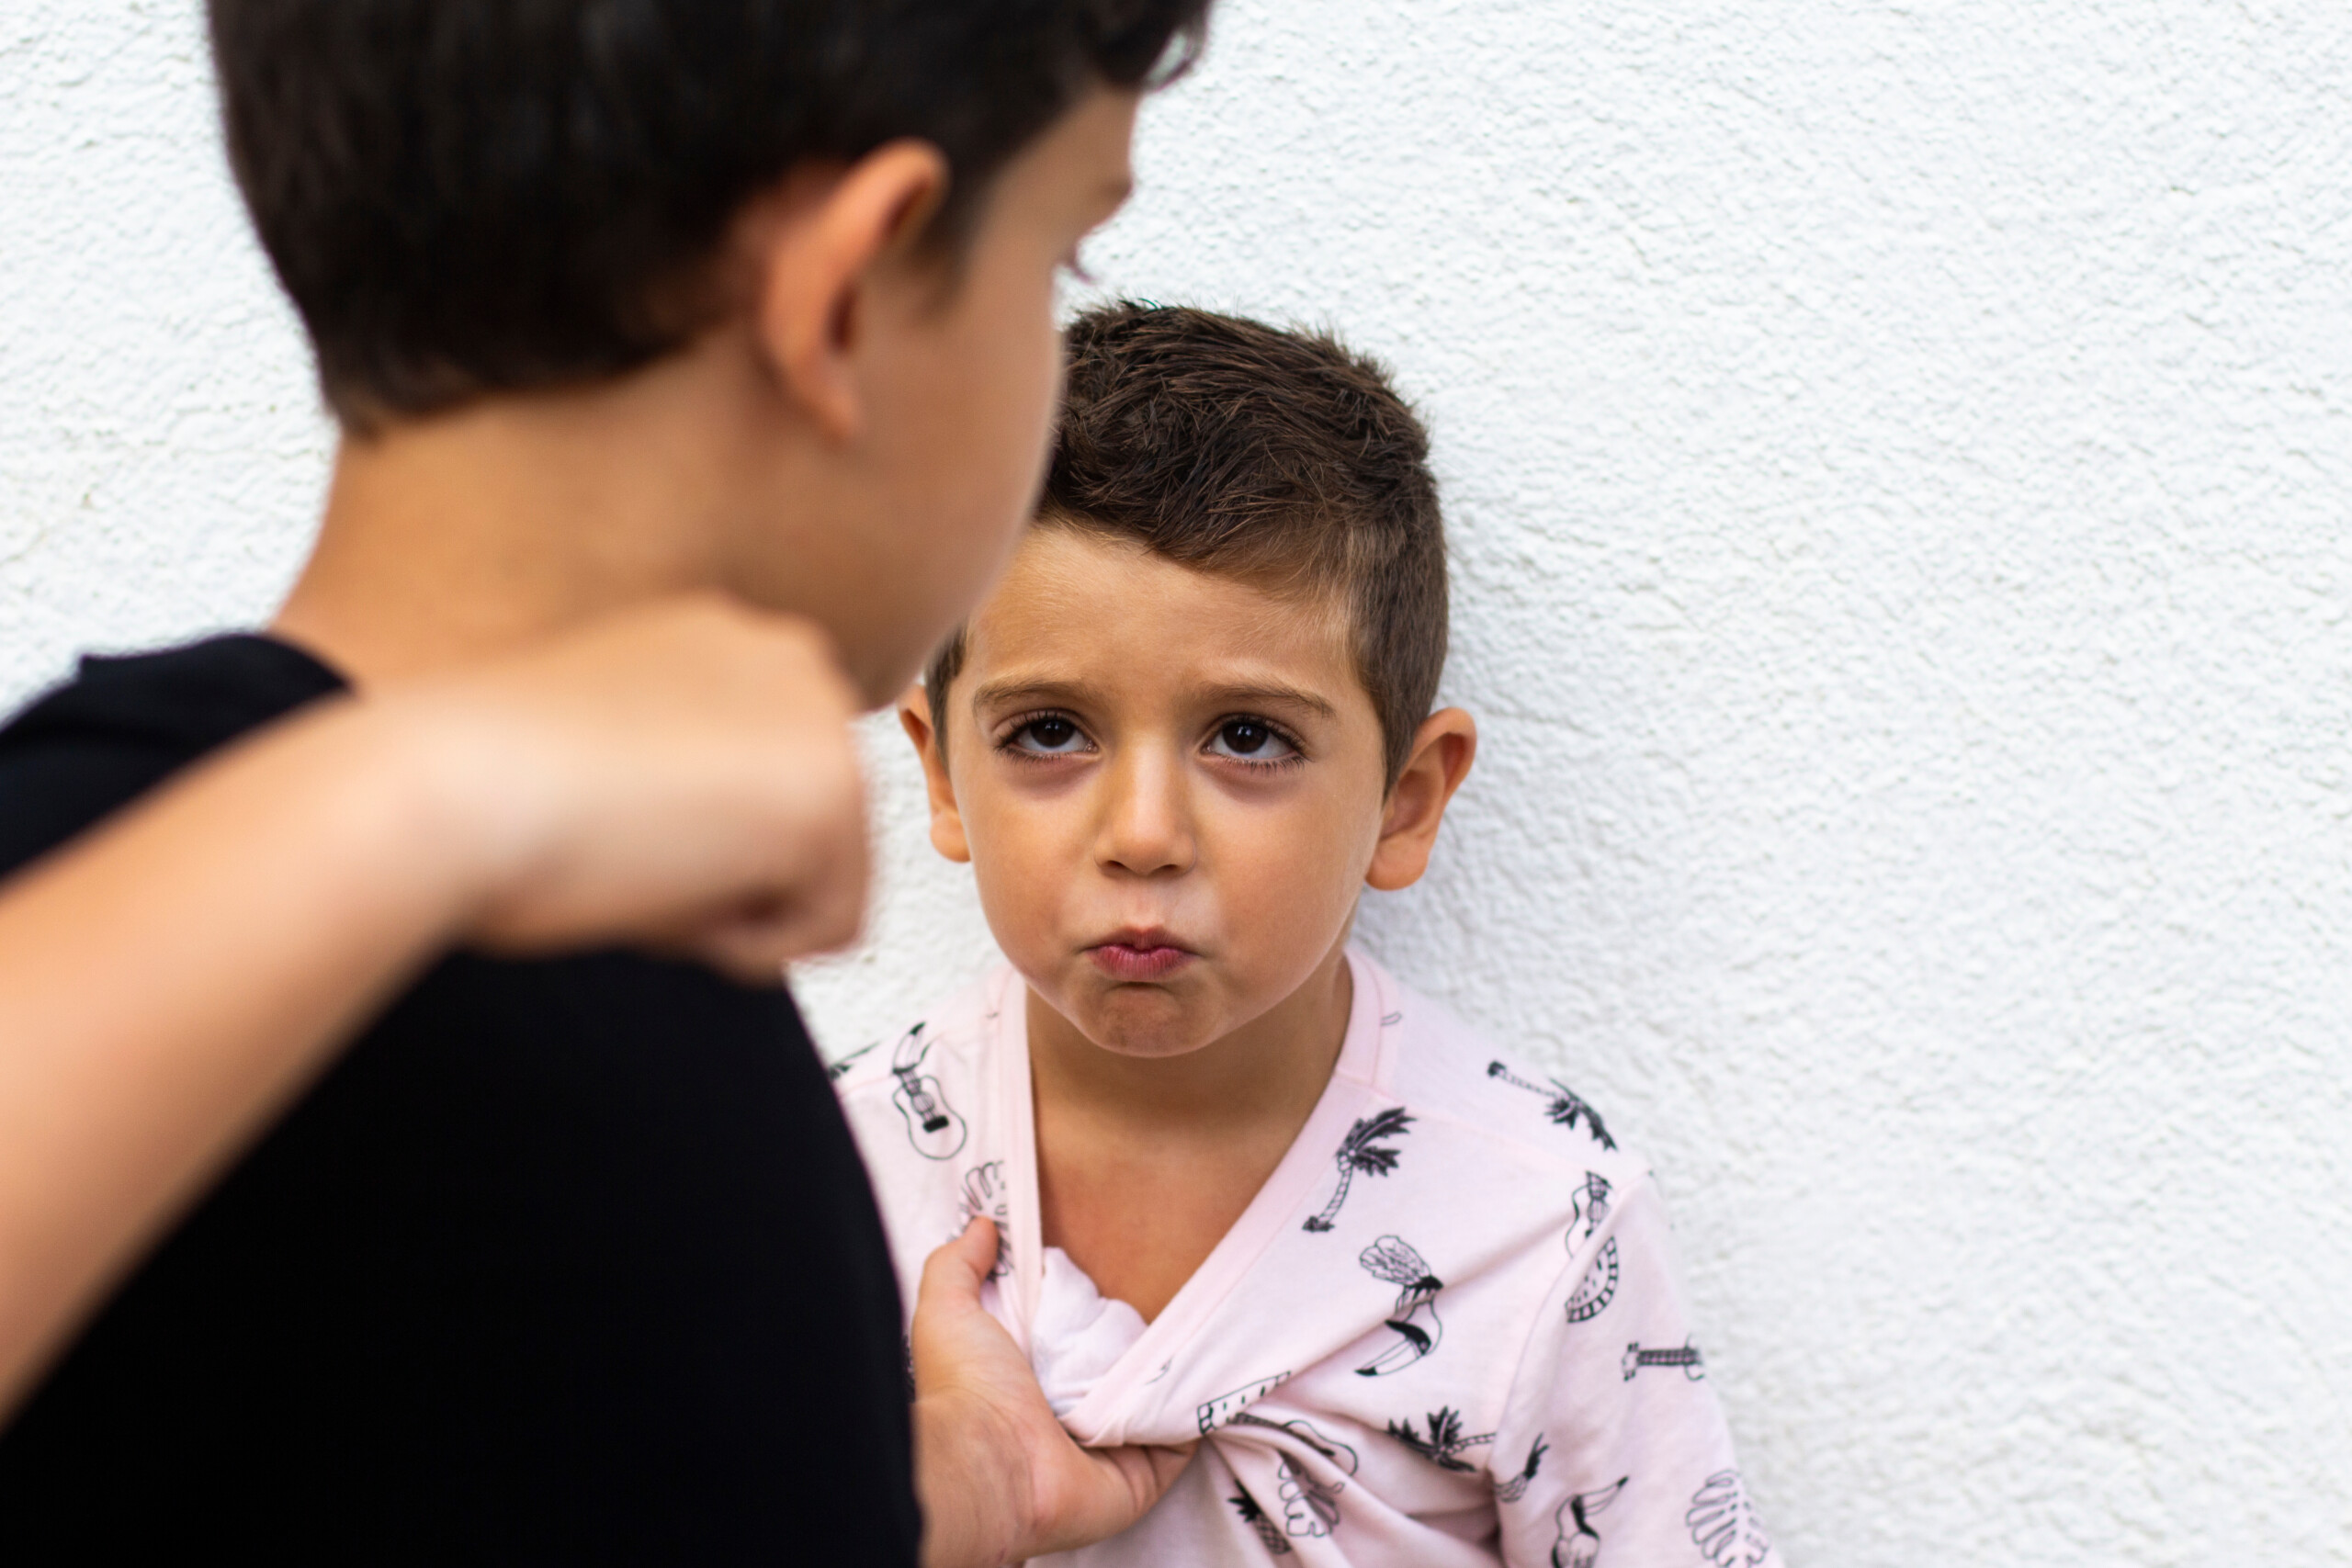 Child Bullying Younger Sibling: How Mom Should NEVER Respond